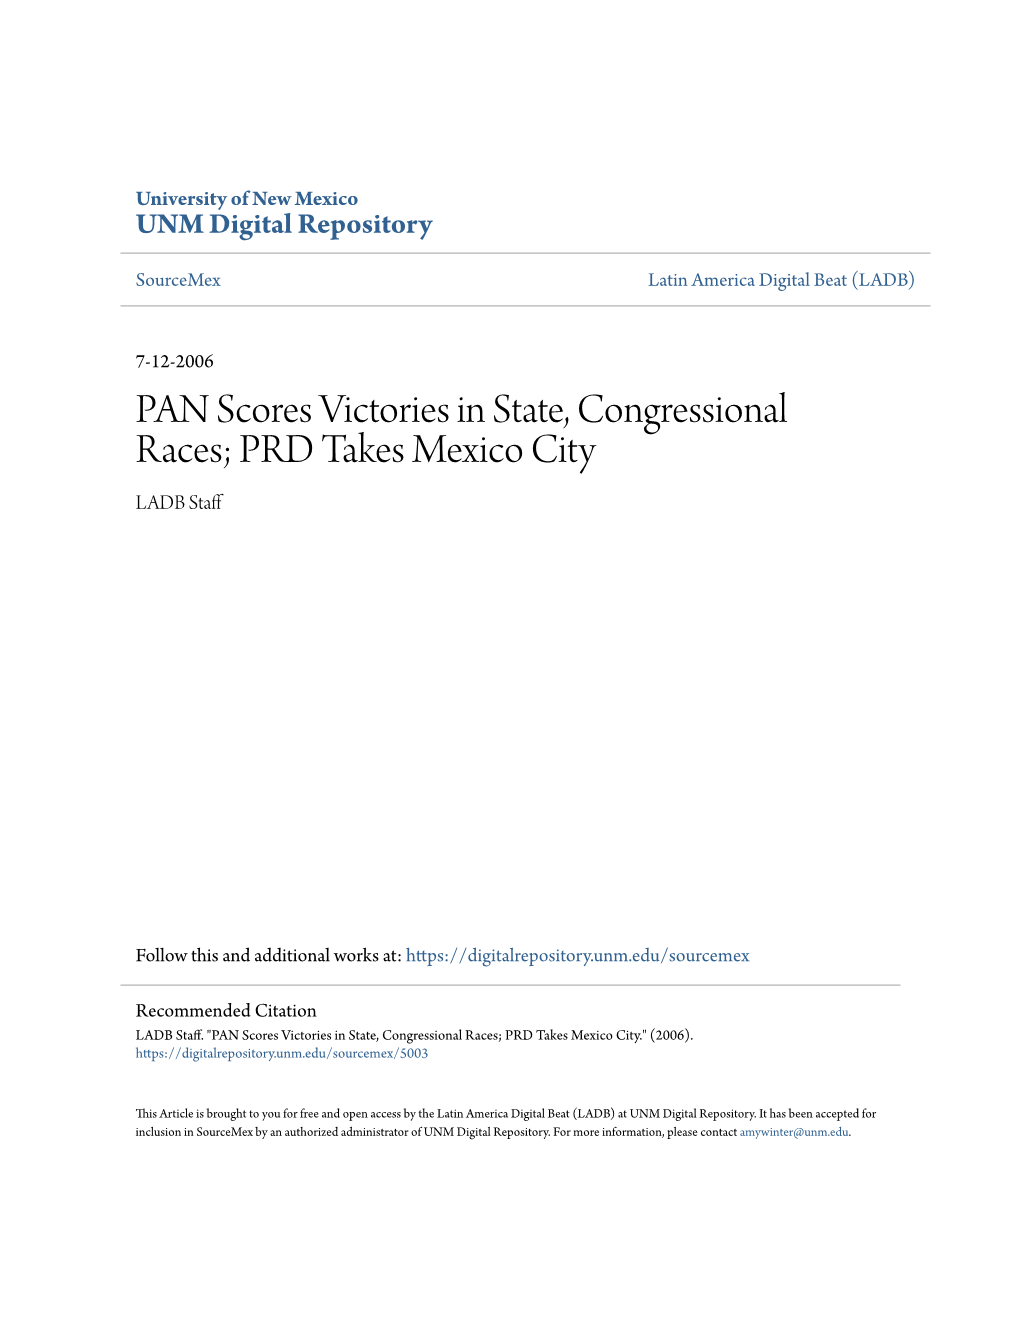 PAN Scores Victories in State, Congressional Races; PRD Takes Mexico City LADB Staff